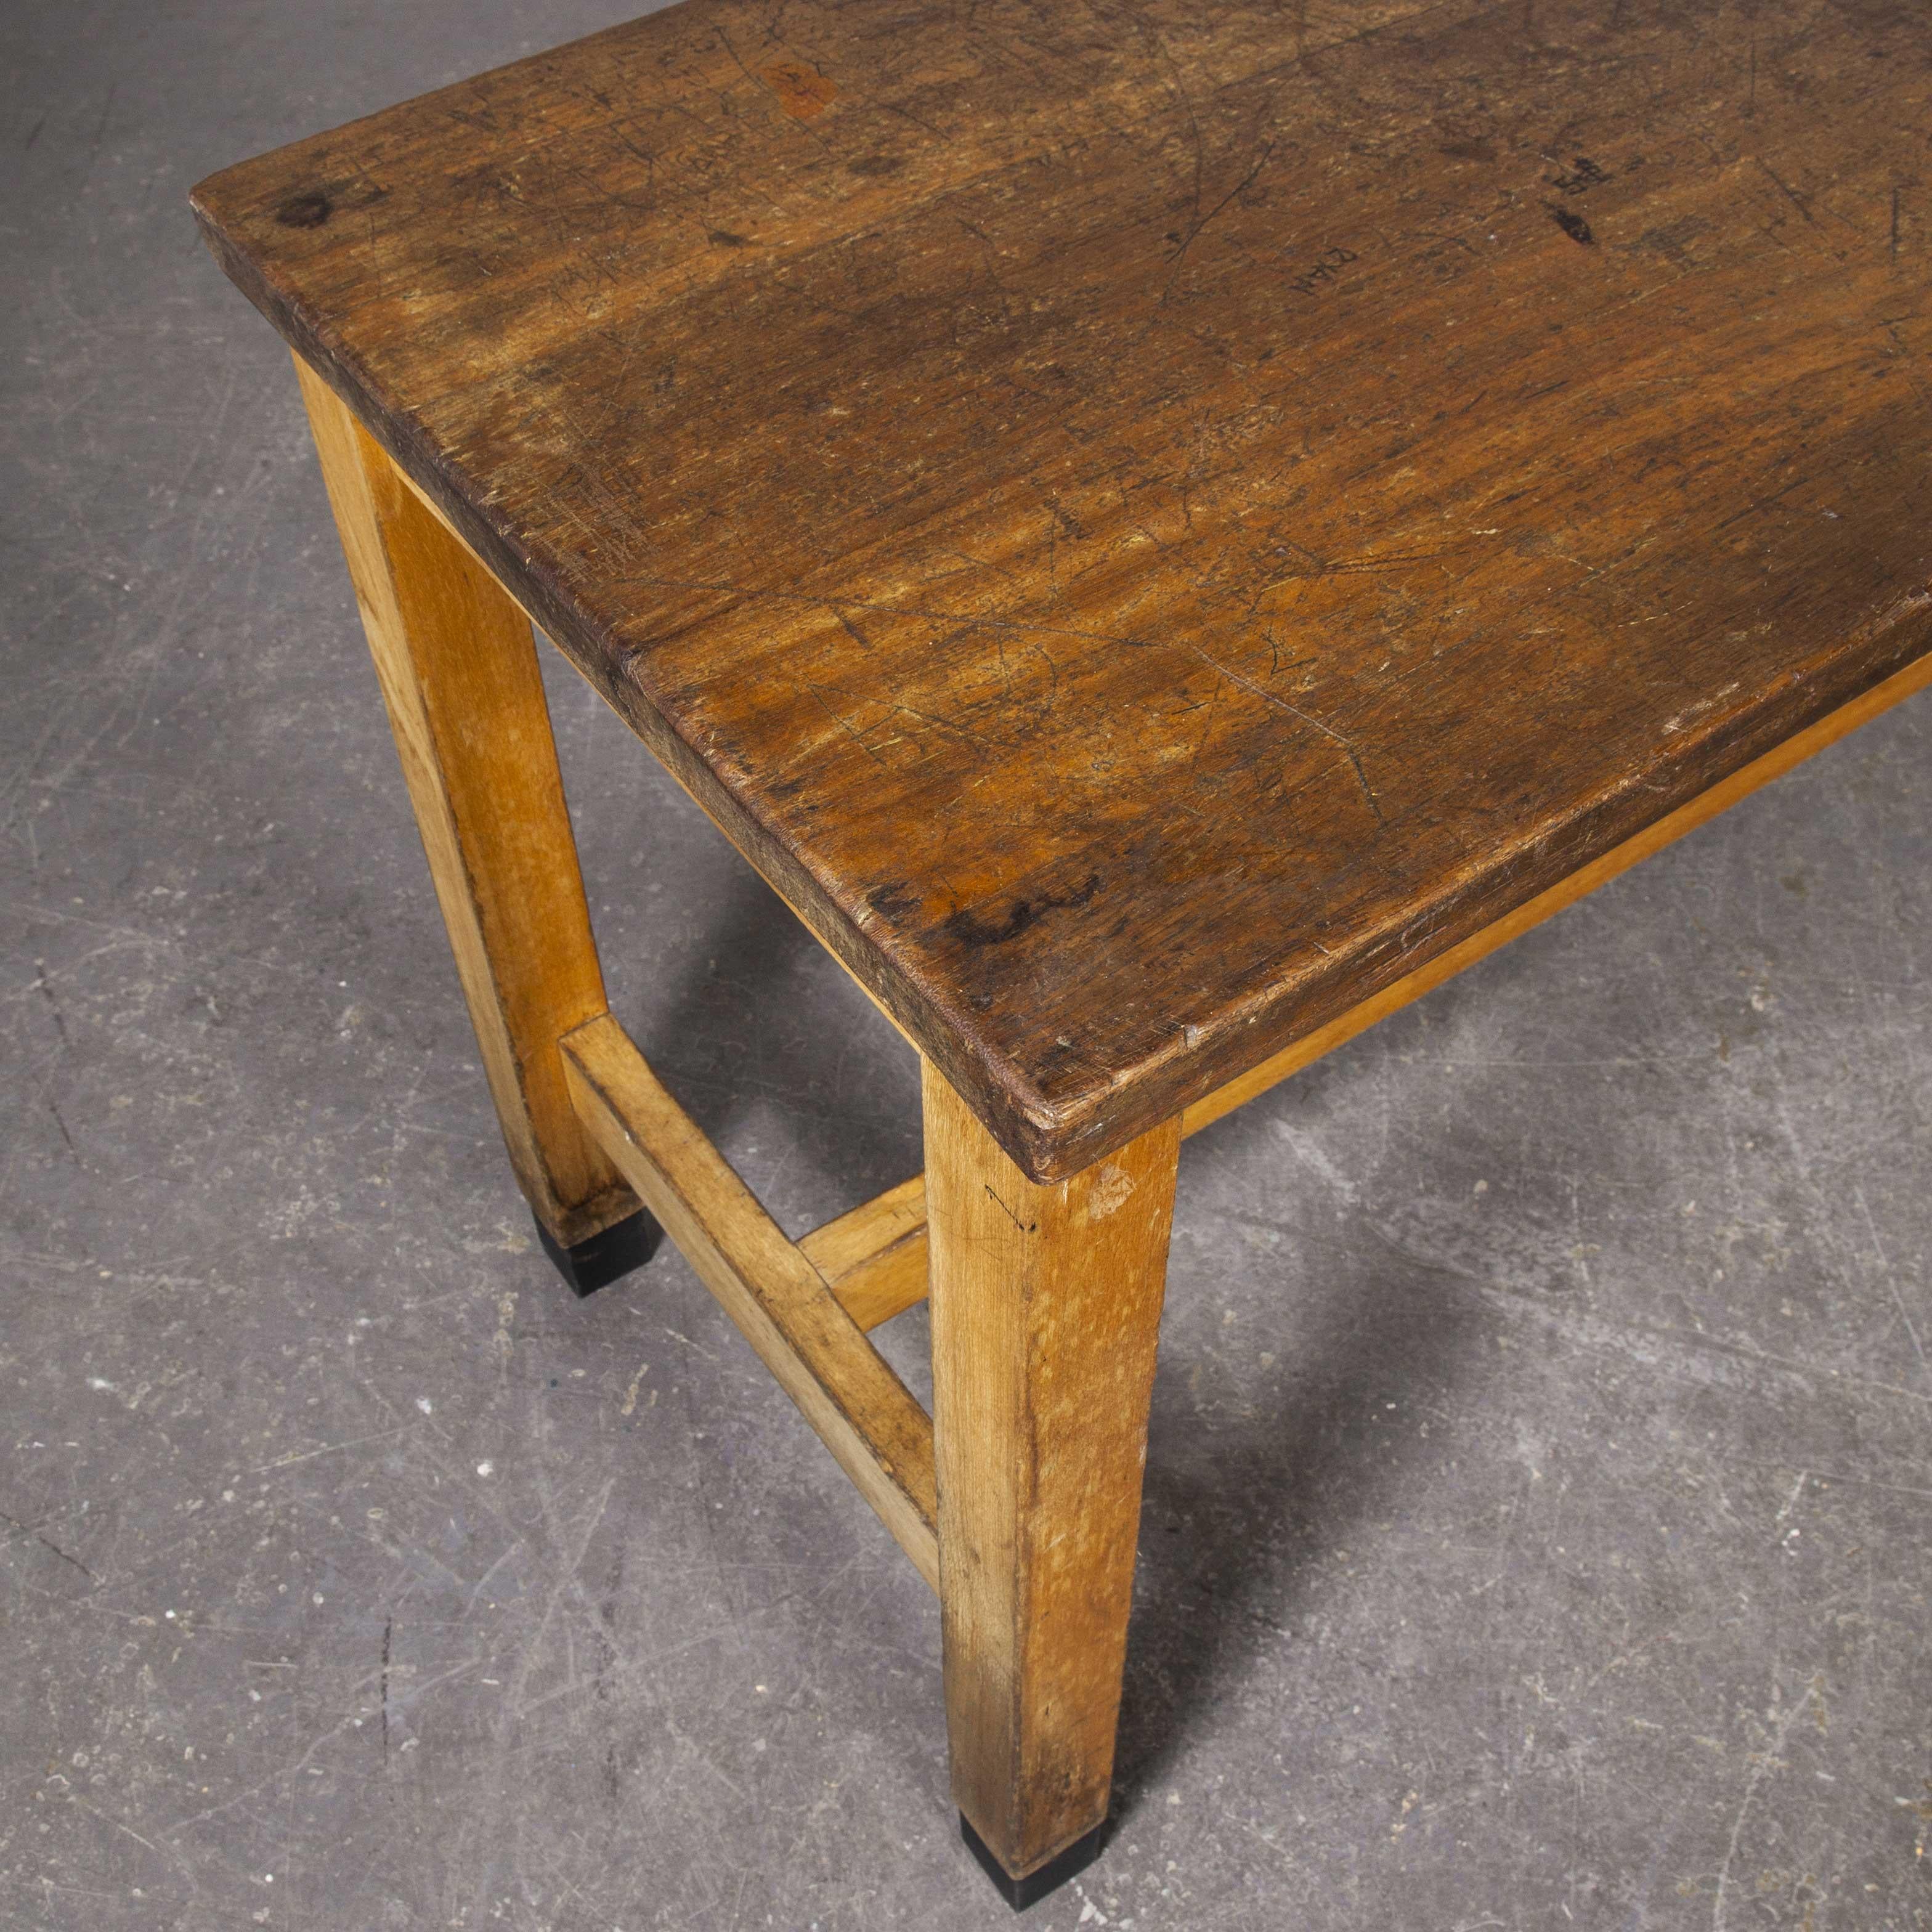 1950s school laboratory rectangular dining table - solid Iroko top

1950s school laboratory rectangular dining table - solid Iroko top. A good practical size with a beech frame base, legs tipped with black and a brilliant heavily used solid iroko